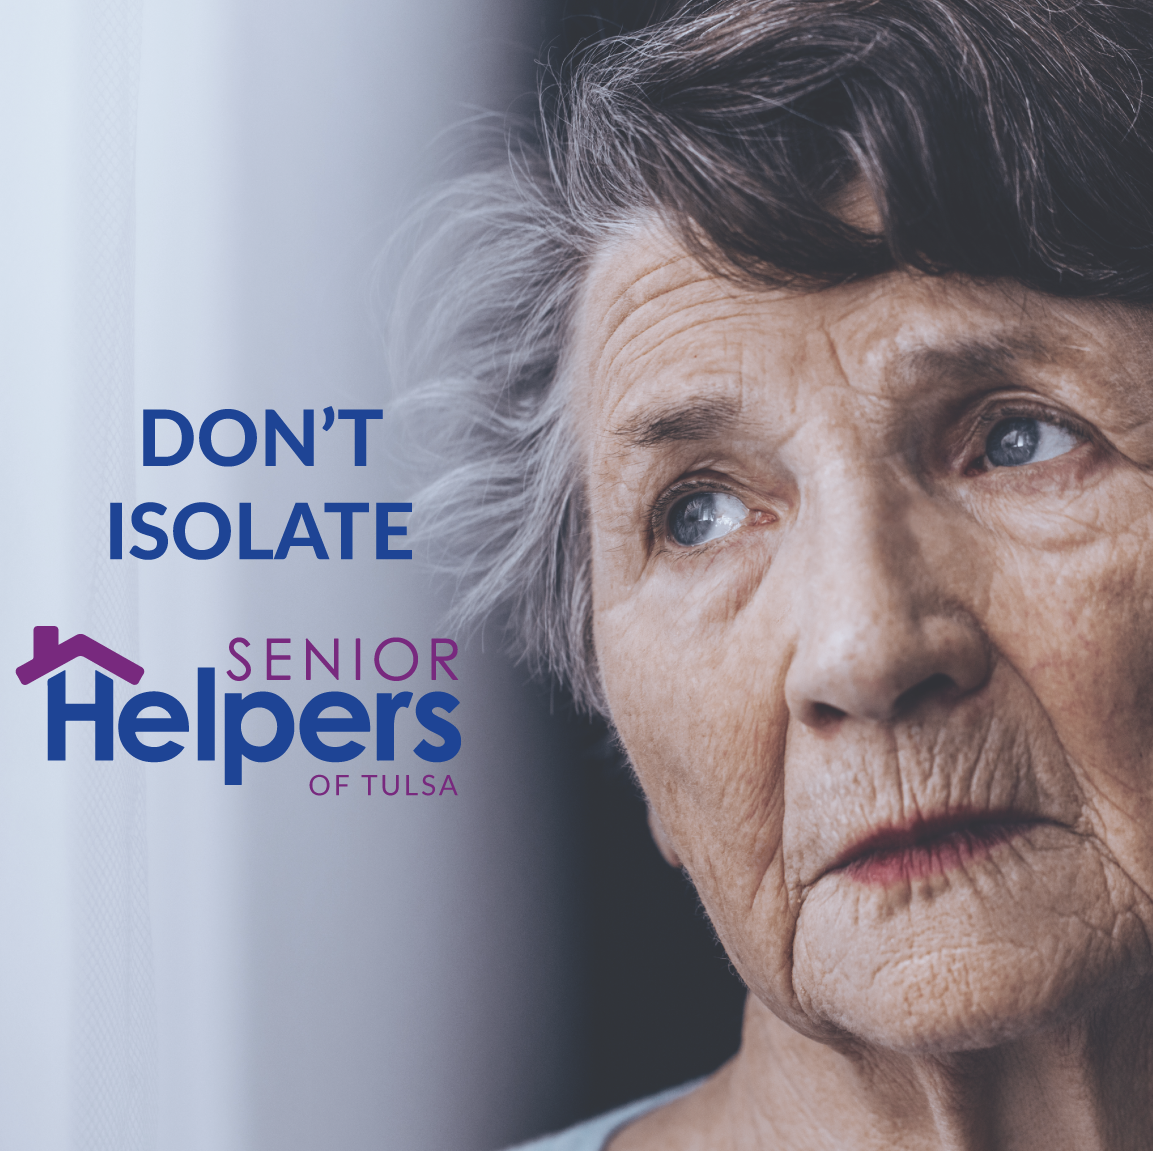 Feelings of isolation are a major problem among aging Americans. A caregiver's companionship can impact not only physical wellbeing, but emotional health as well.